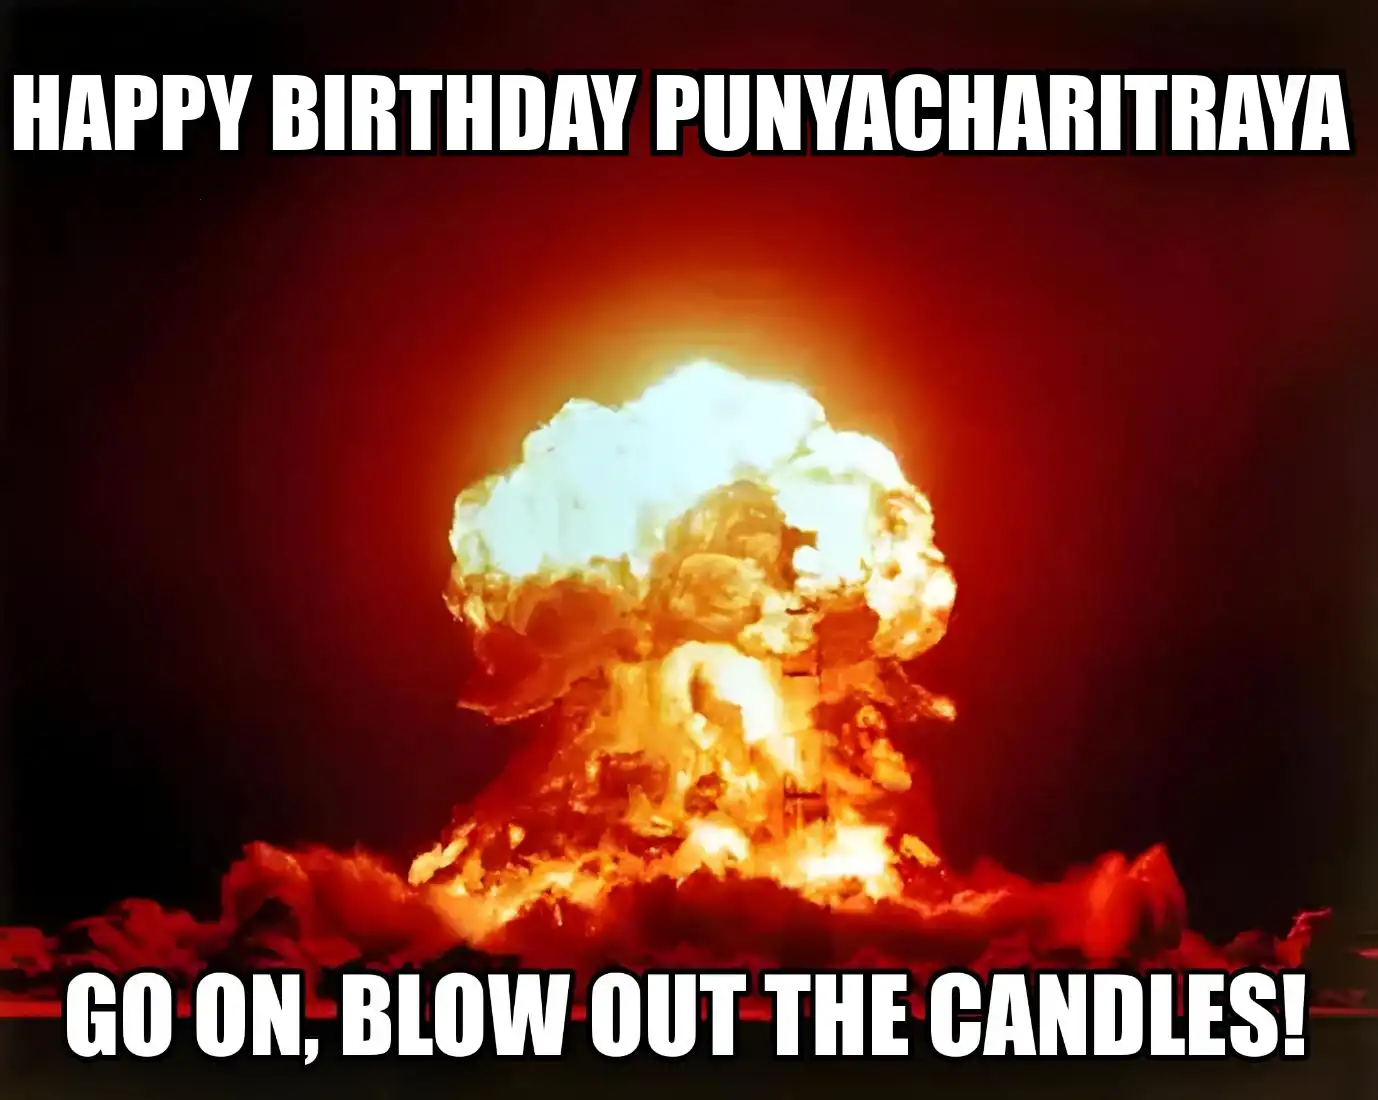 Happy Birthday Punyacharitraya Go On Blow Out The Candles Meme